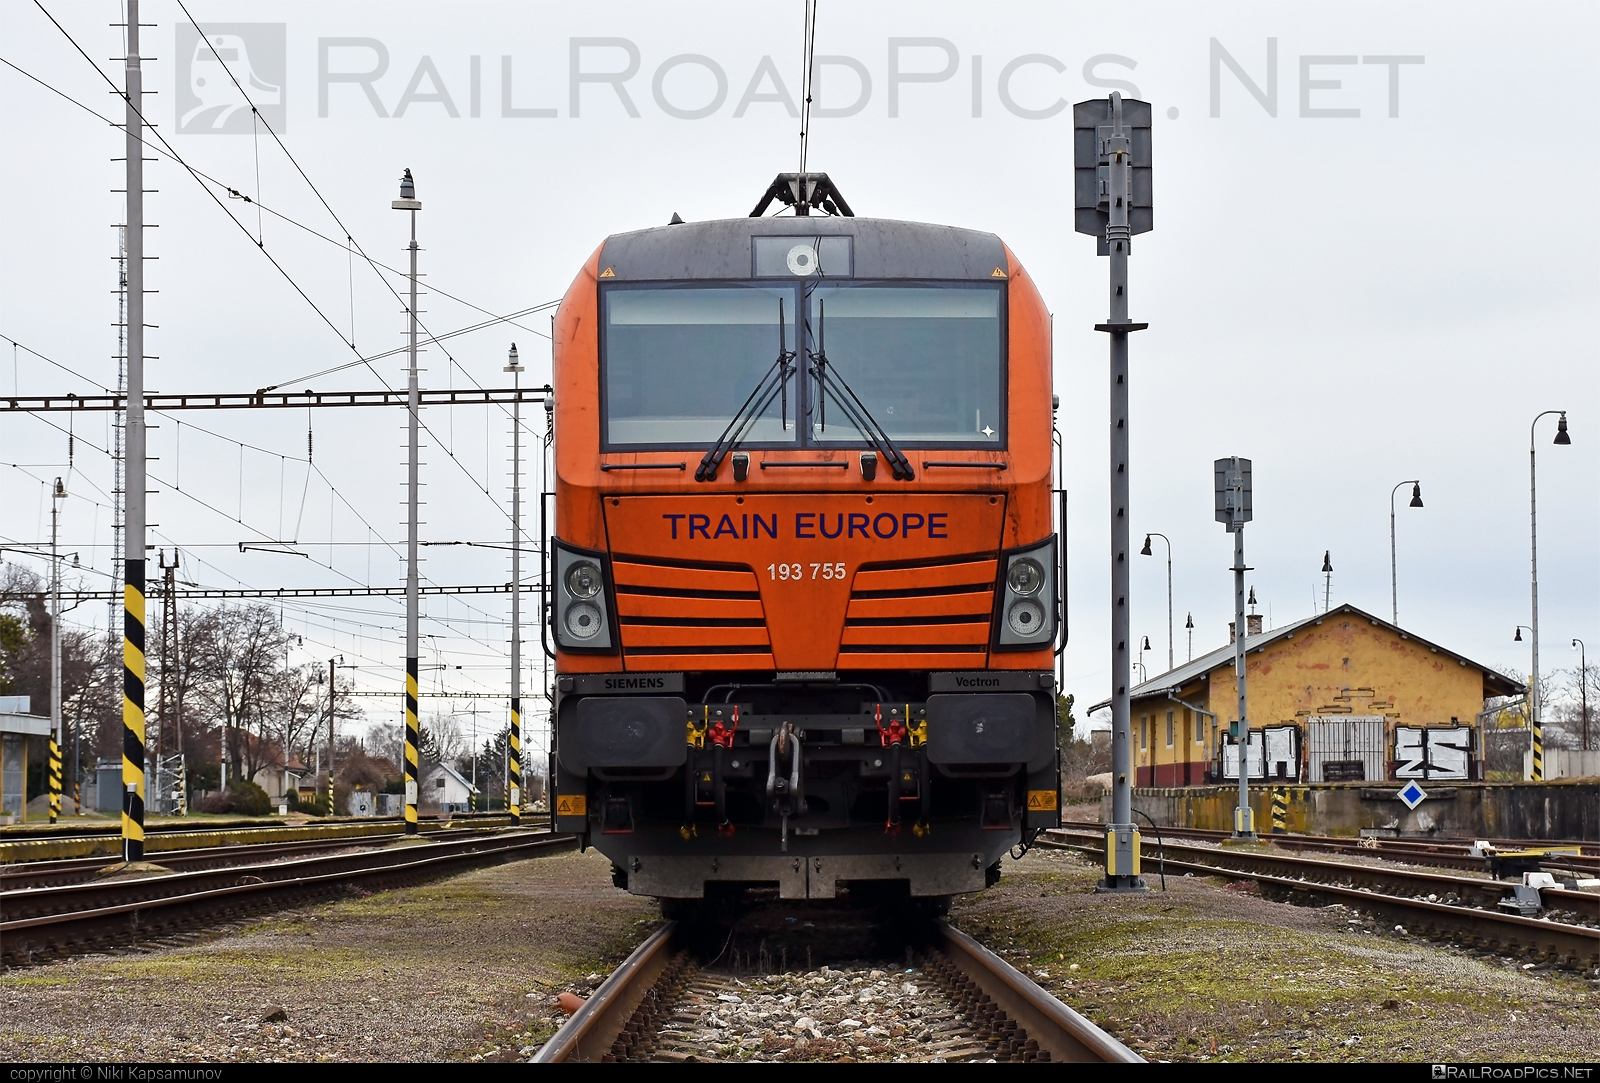 Siemens Vectron MS - 193 755 operated by LOKORAIL, a.s. #ell #ellgermany #eloc #europeanlocomotiveleasing #lokorail #lrl #siemens #siemensvectron #siemensvectronms #traineurope #vectron #vectronms